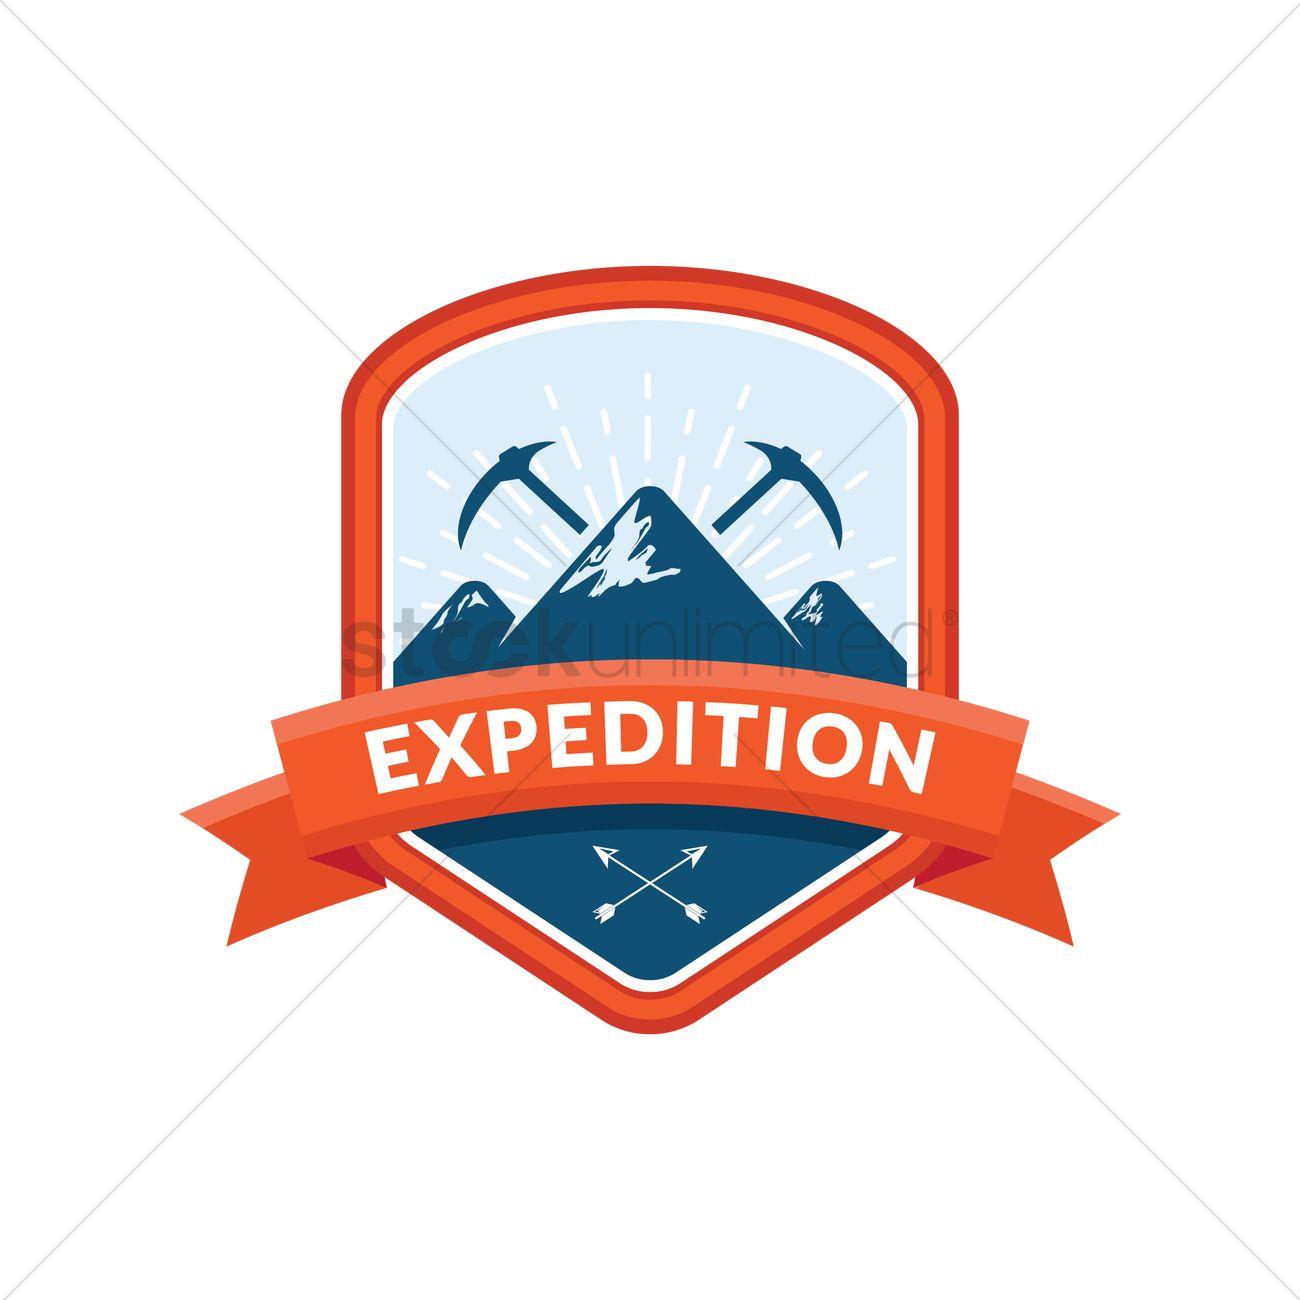 Expedition Logo - Expedition logo element Vector Image - 1990771 | StockUnlimited